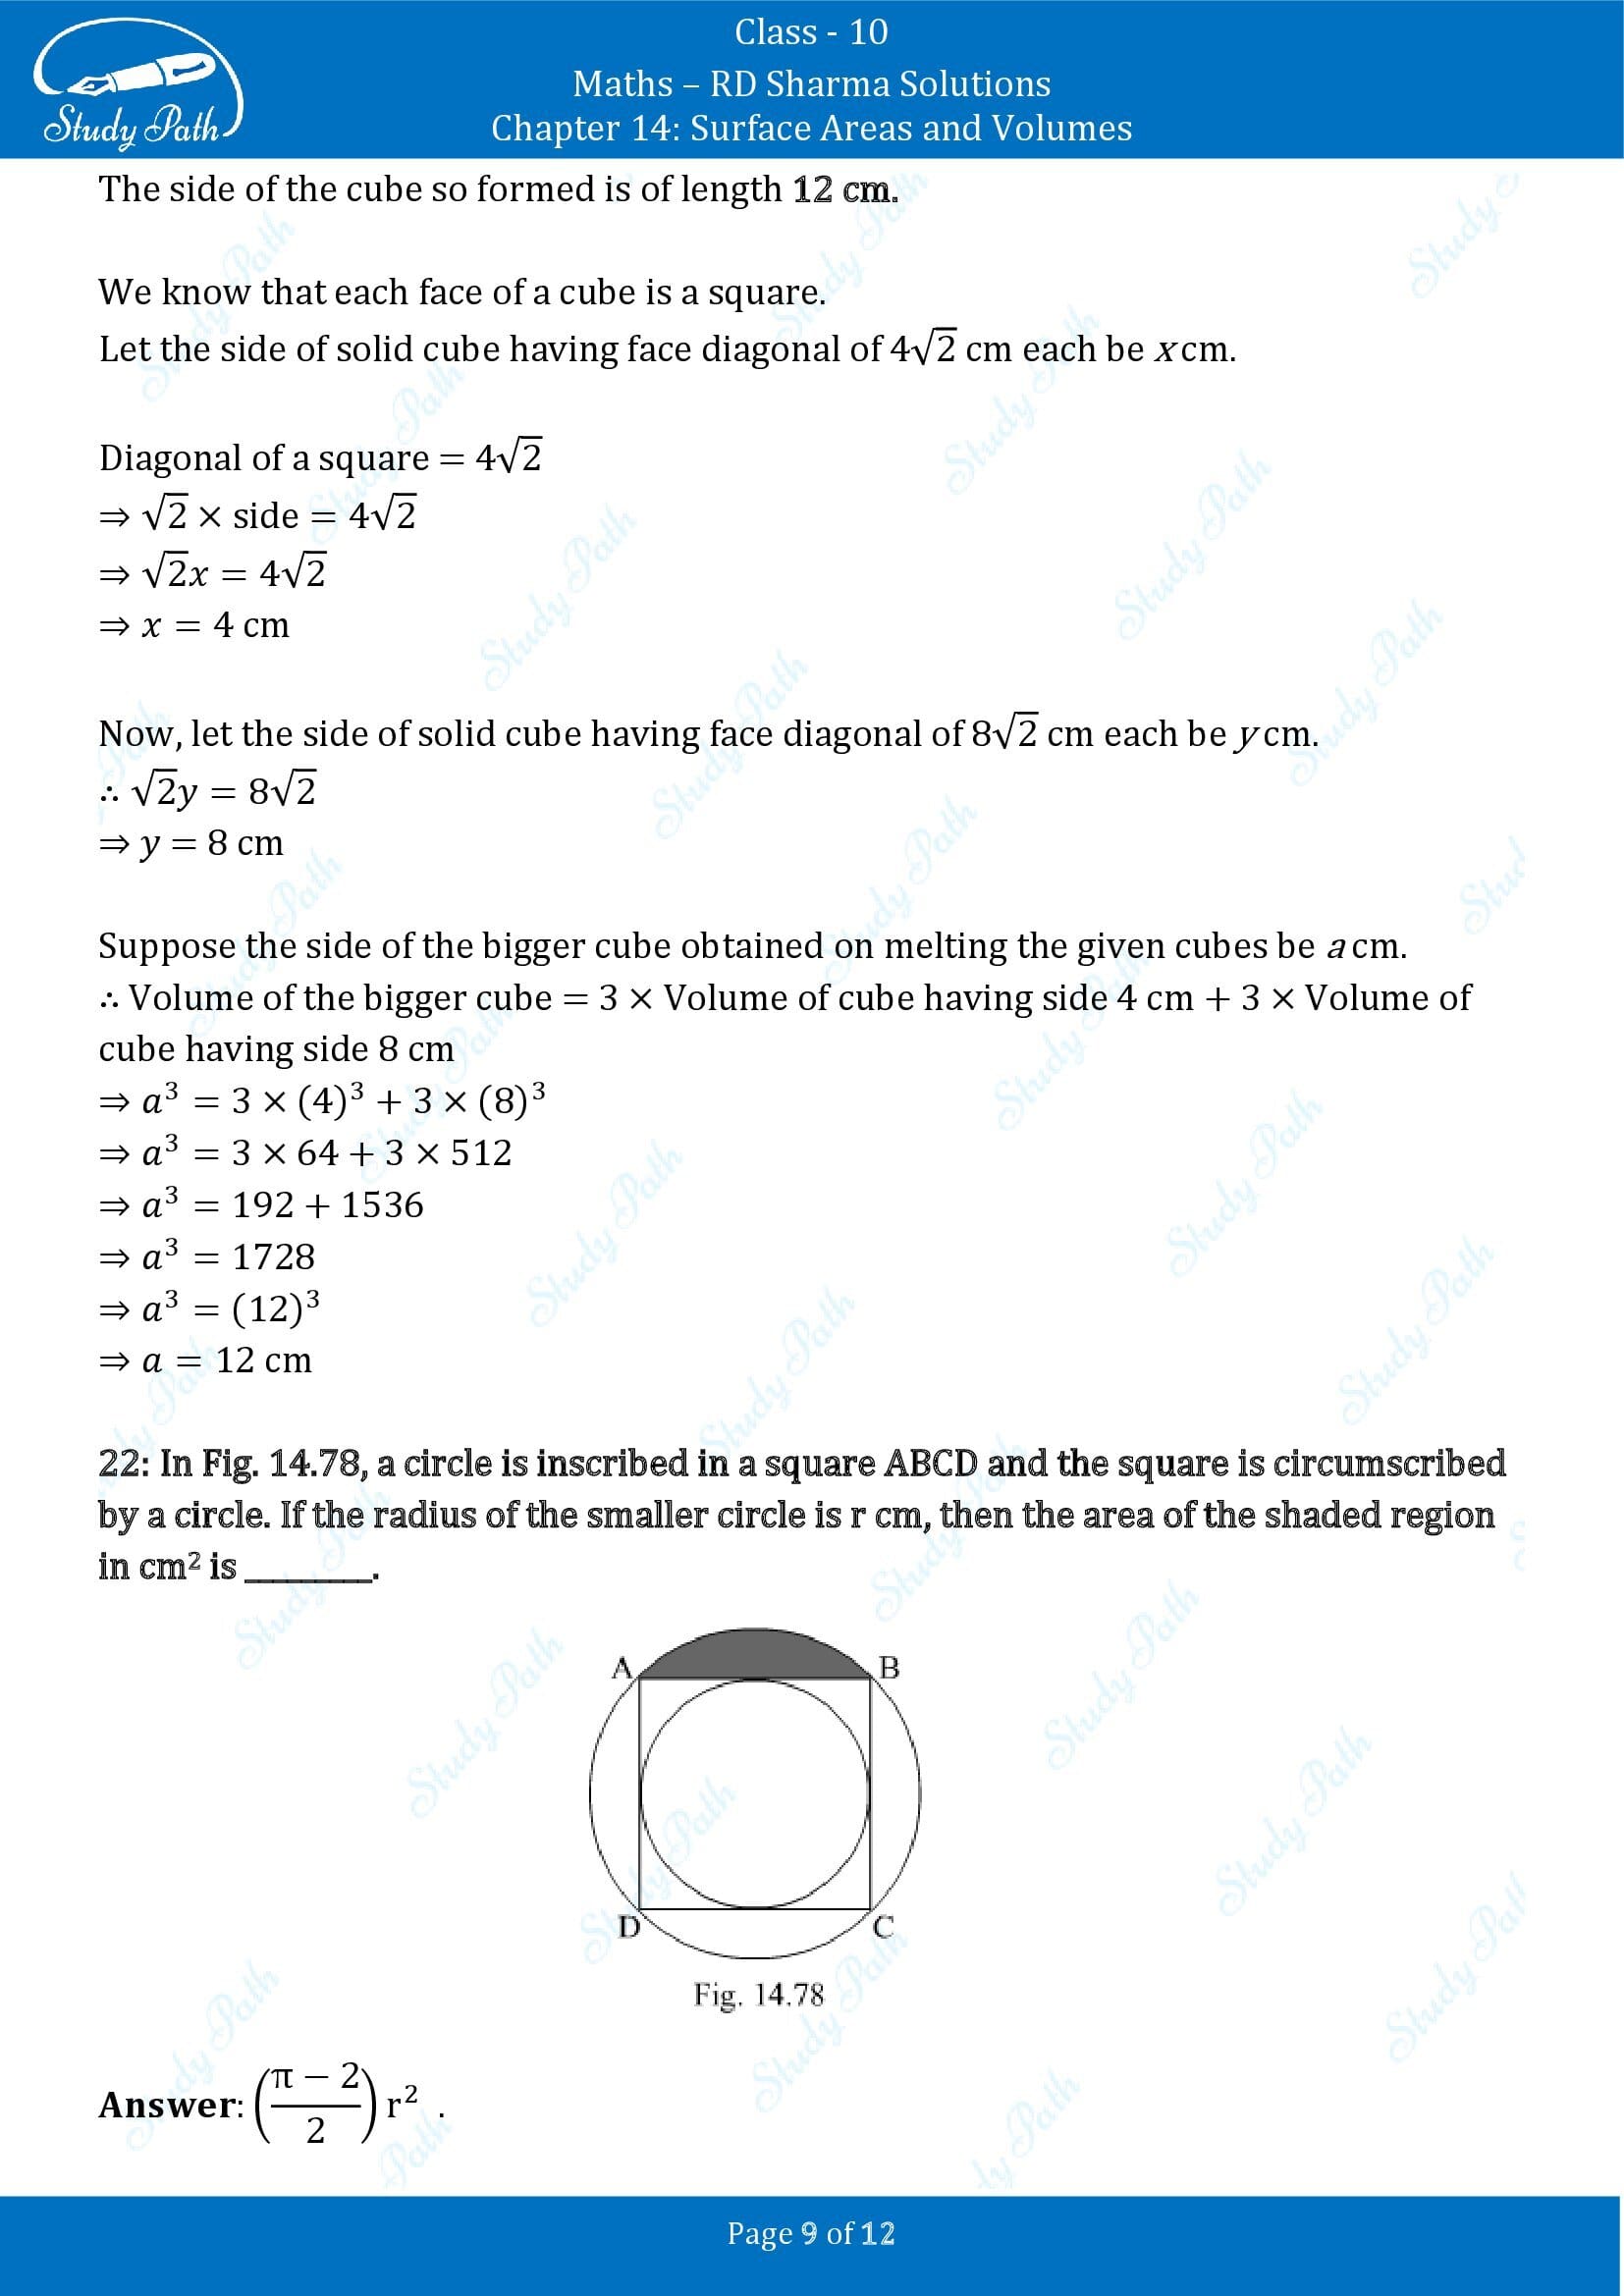 RD Sharma Solutions Class 10 Chapter 14 Surface Areas and Volumes Fill in the Blank Type Questions FBQs 00009